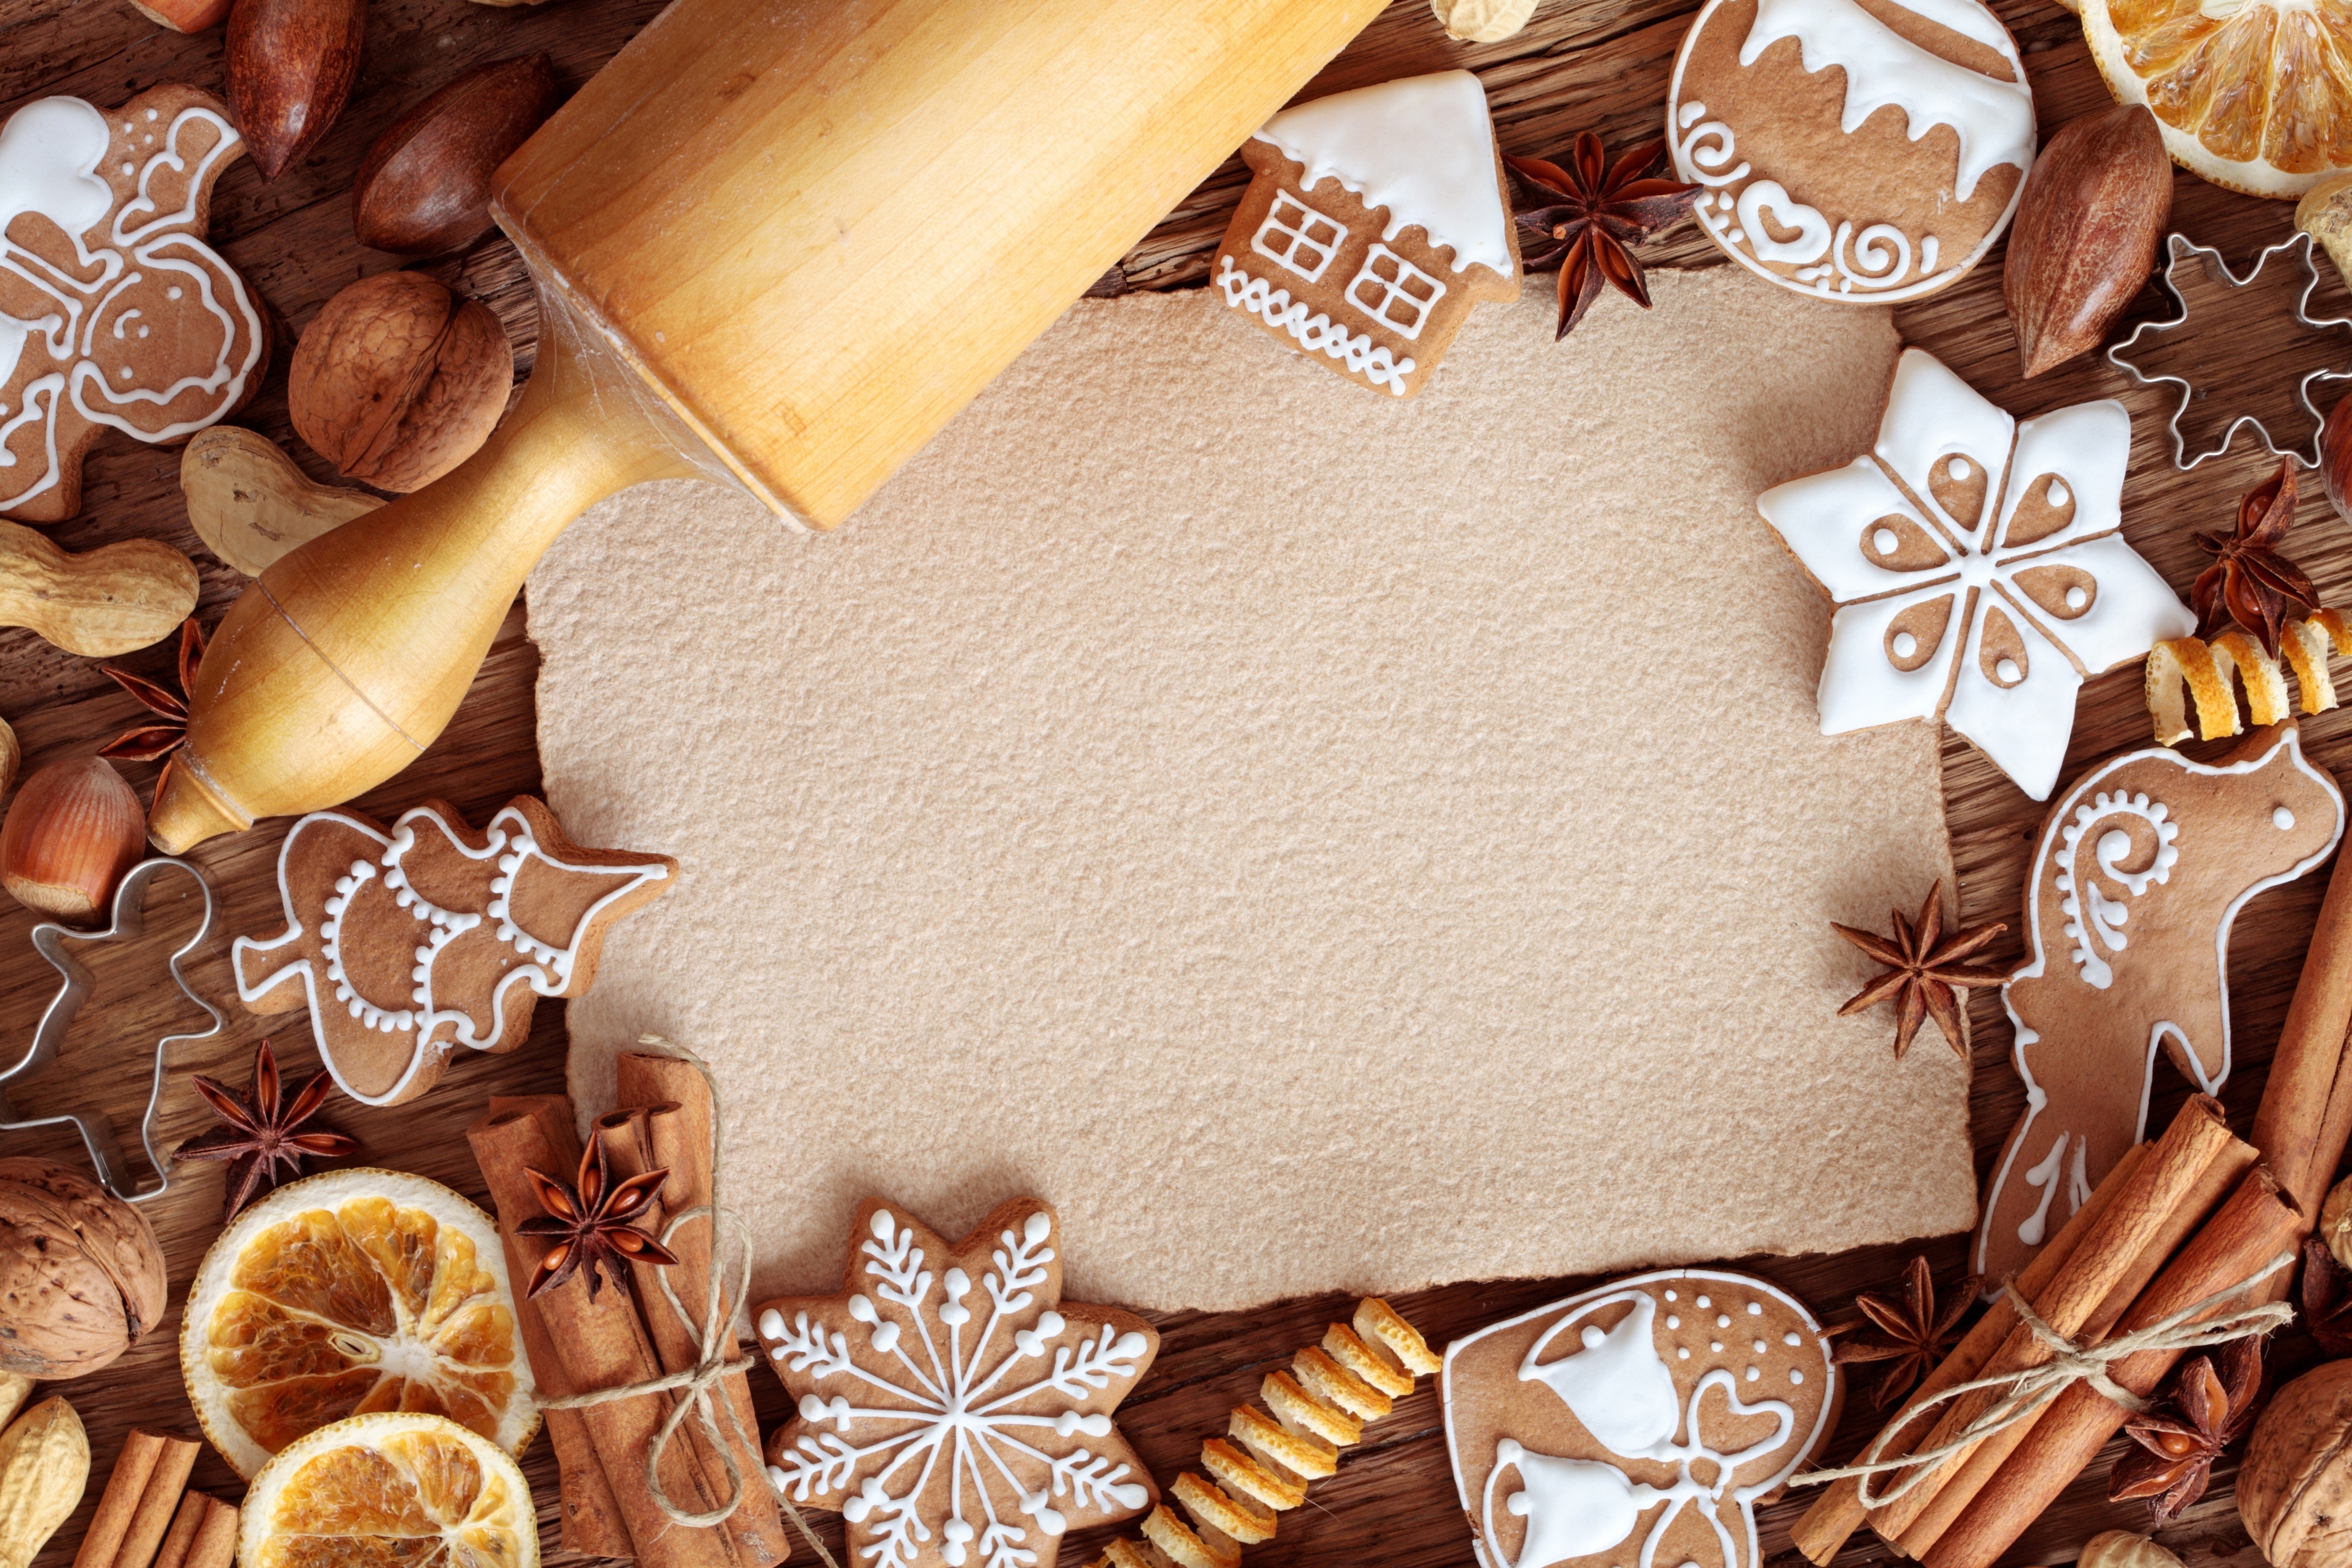 Preparation Of Christmas Cookies Wallpapers And Images HD Wallpapers Download Free Images Wallpaper [wallpaper981.blogspot.com]